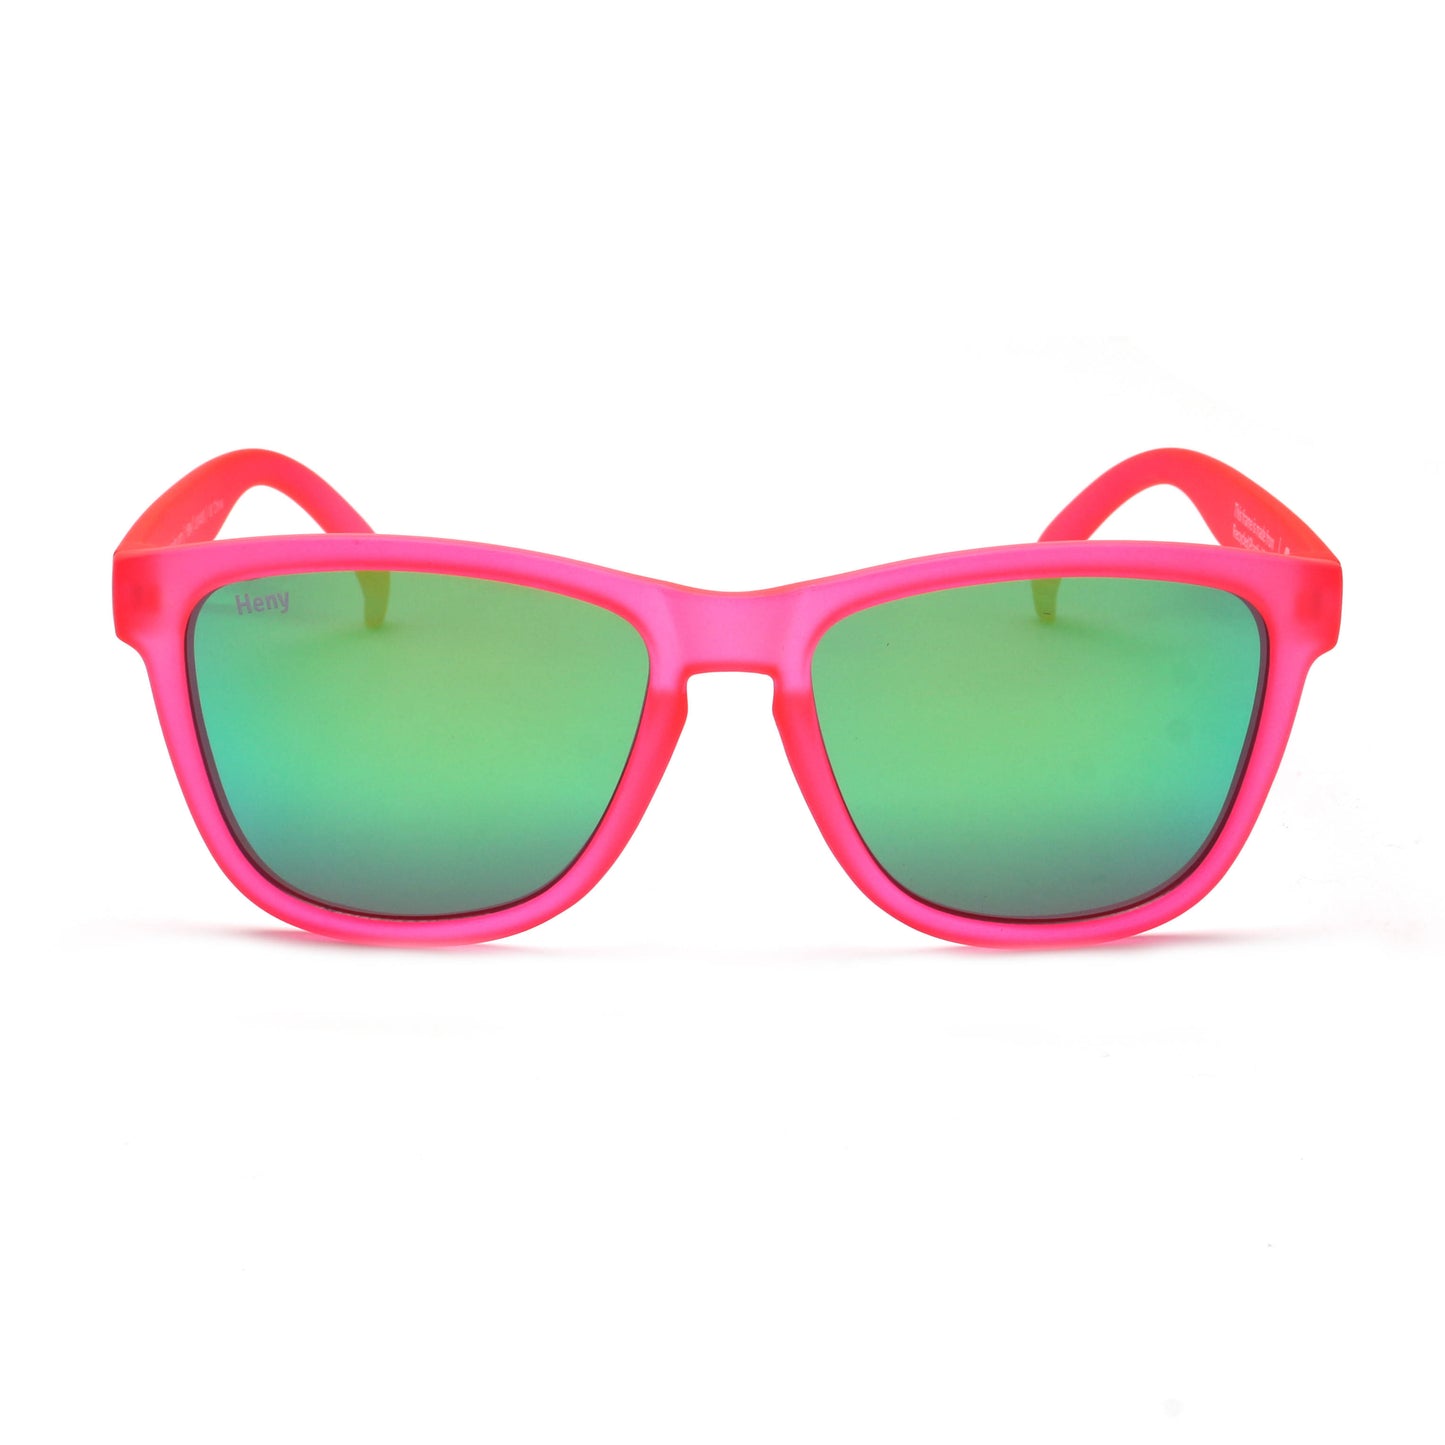 Front  view of the You Be You pink polarized from Heny Sunglasses